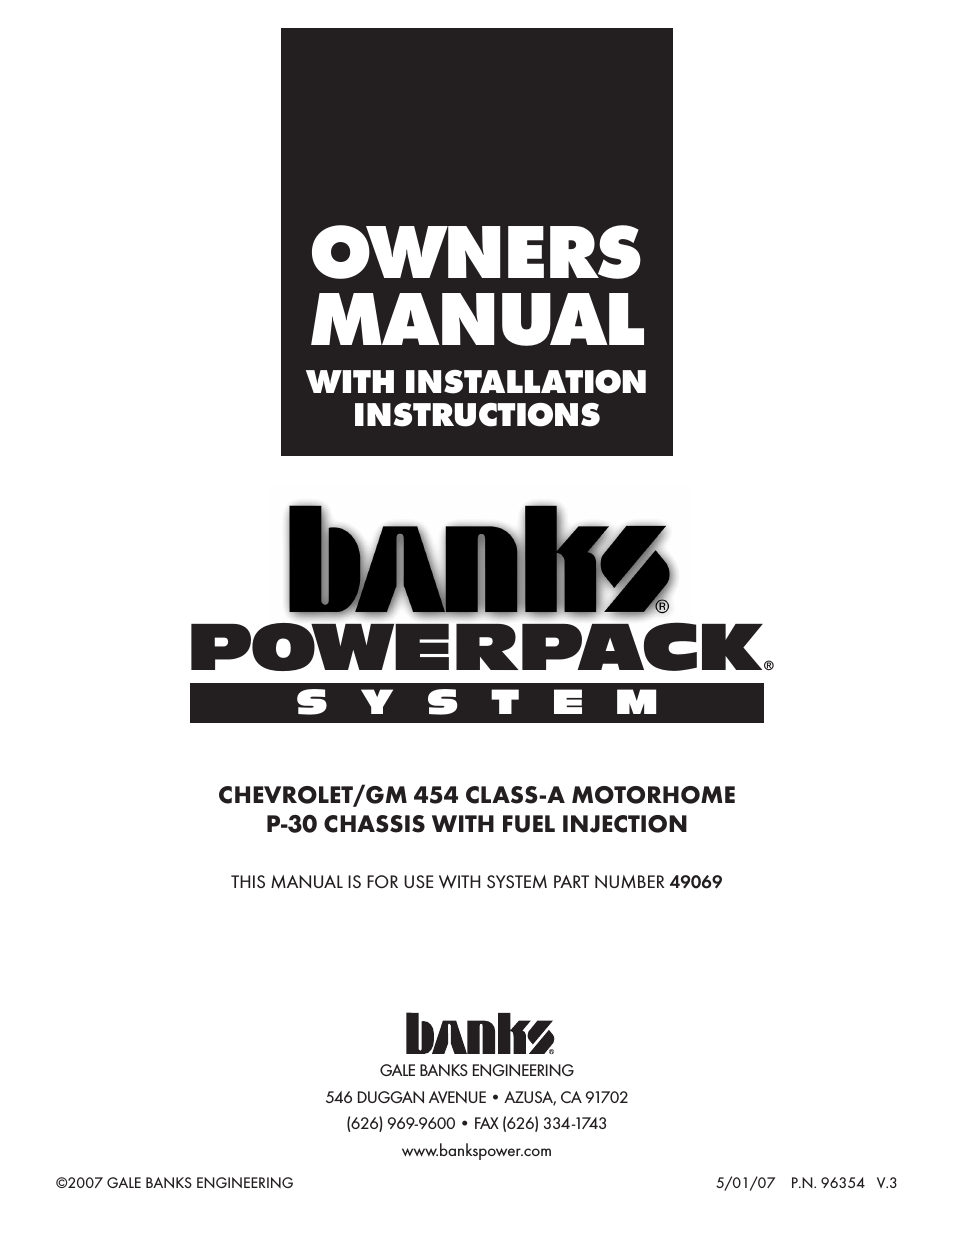 GM Motorhomes: (Gas ’82 - 95 7.4L) PowerPack system (EFI TBI, P30 chassis)